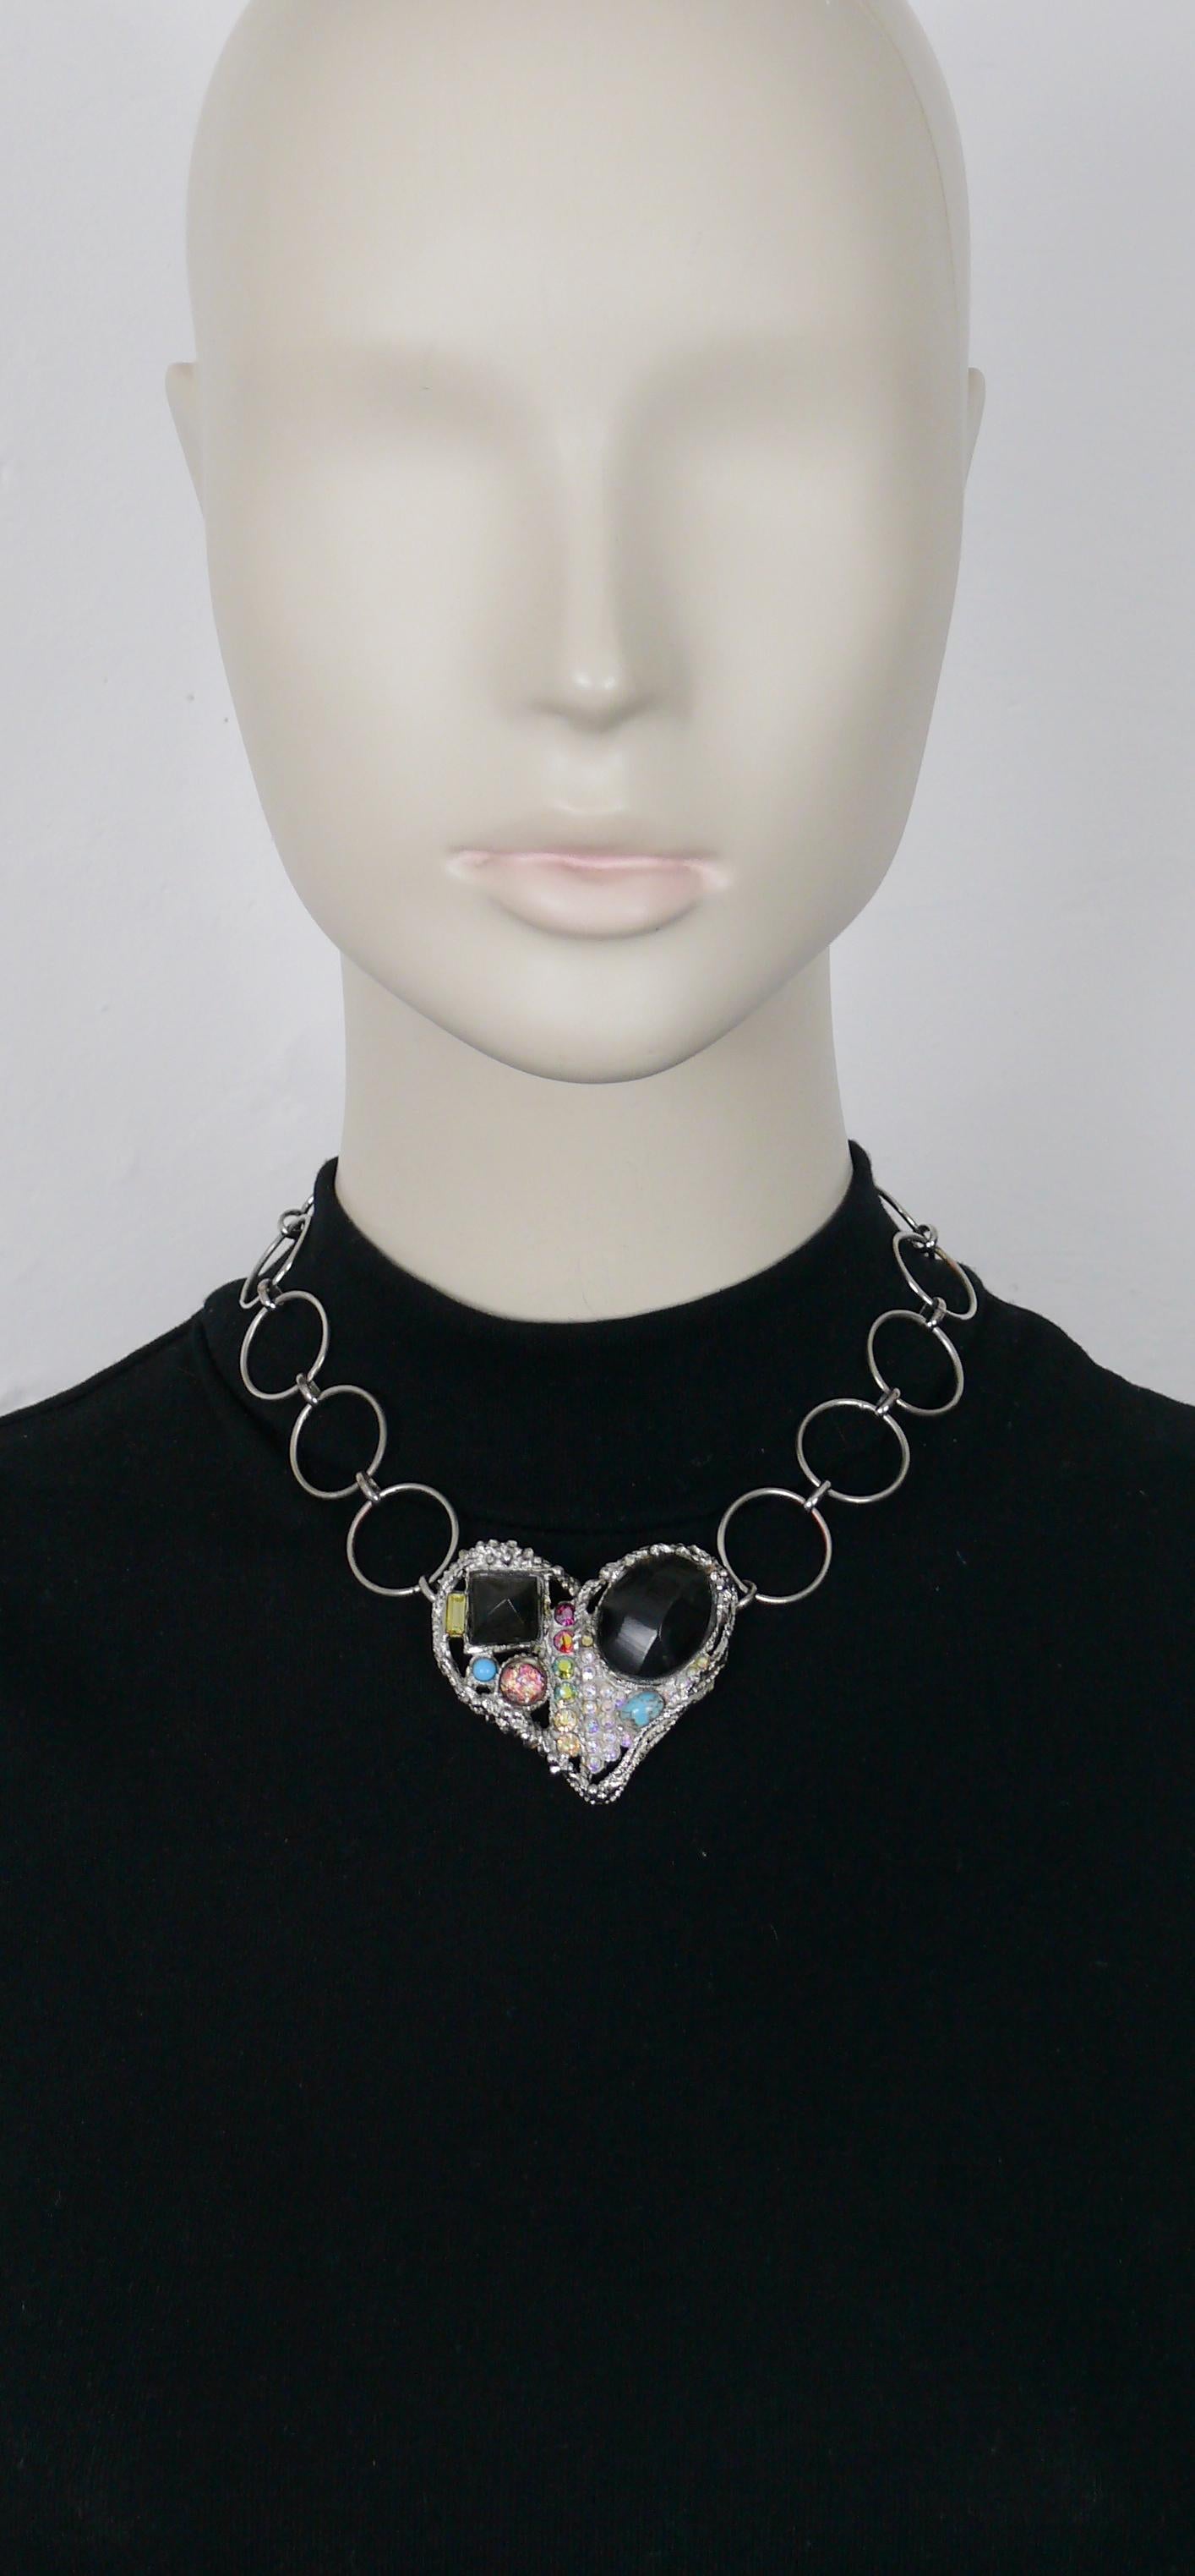 CHRISTIAN LACROIX vintage chain necklace featuring a textured brutalist heart embellished with multicolour crystals, glass cabochons and two faux horn elements.

Silver tone metal hardware.

Adjustable T-bar closure.

Marked CHRISTIAN LACROIX CL